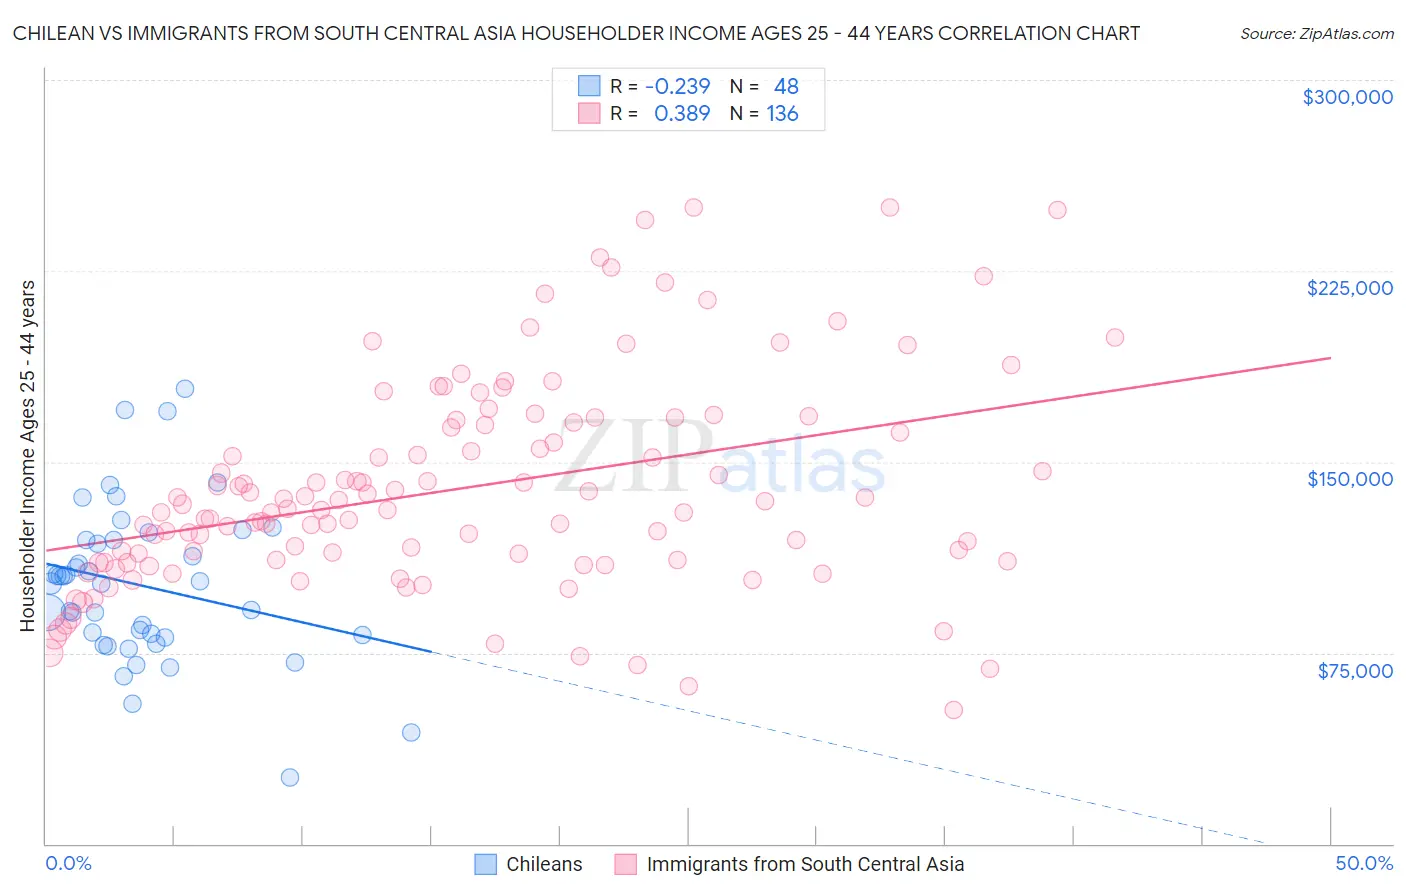 Chilean vs Immigrants from South Central Asia Householder Income Ages 25 - 44 years